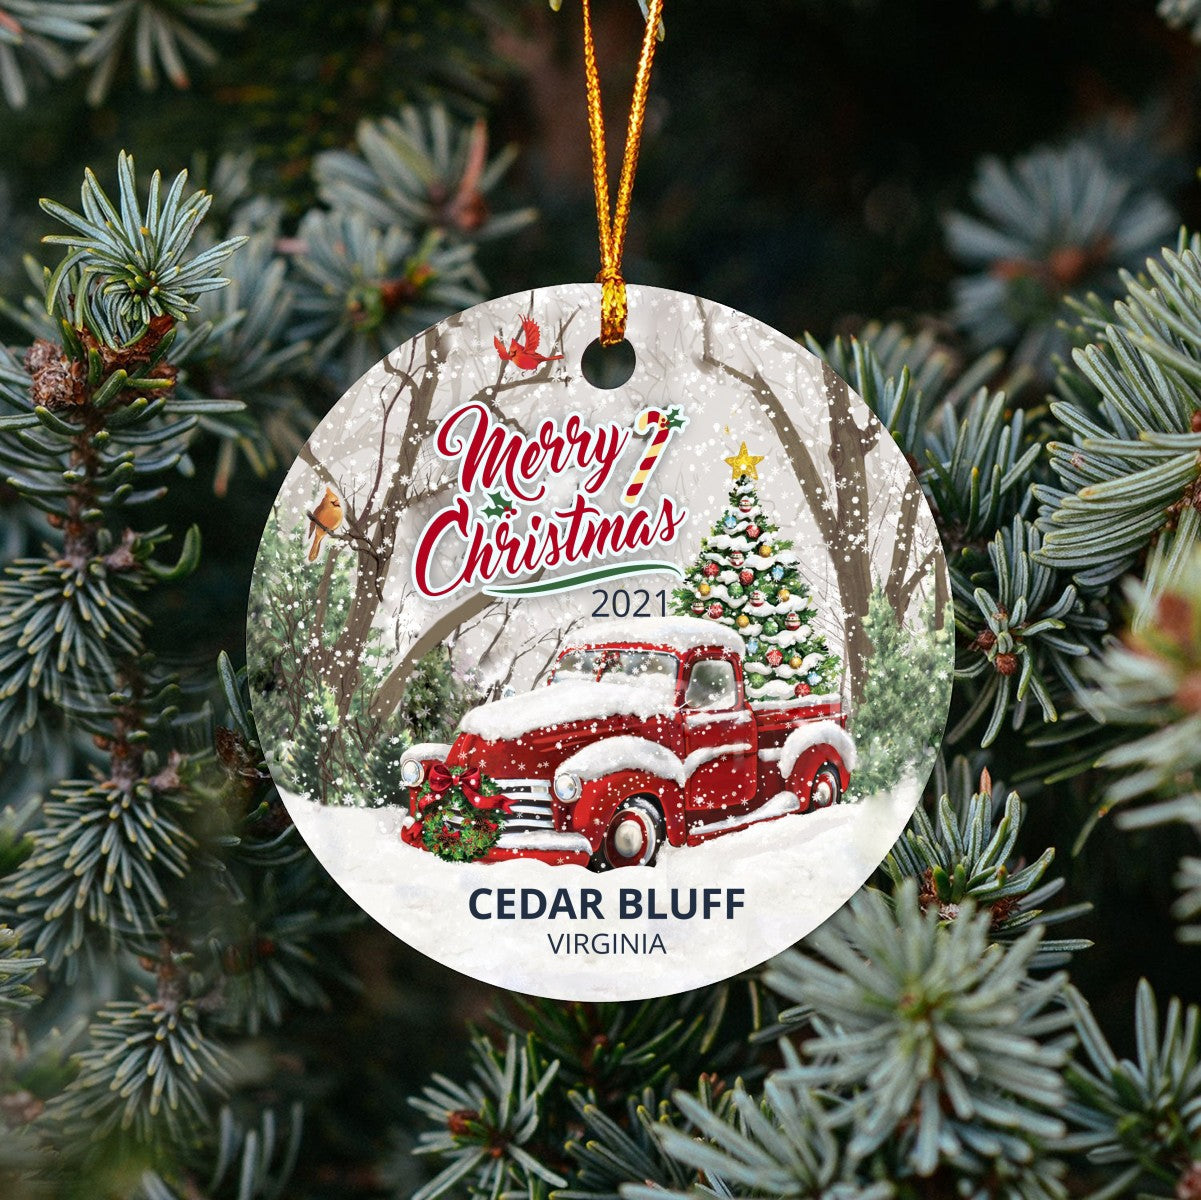 Christmas Tree Ornaments Cedar Bluff - Ornament With Name City, State Cedar Bluff Virginia VA Ornament - Red Truck Xmas Ornaments 3'' Plastic Gift For Family, Friend And Housewarming